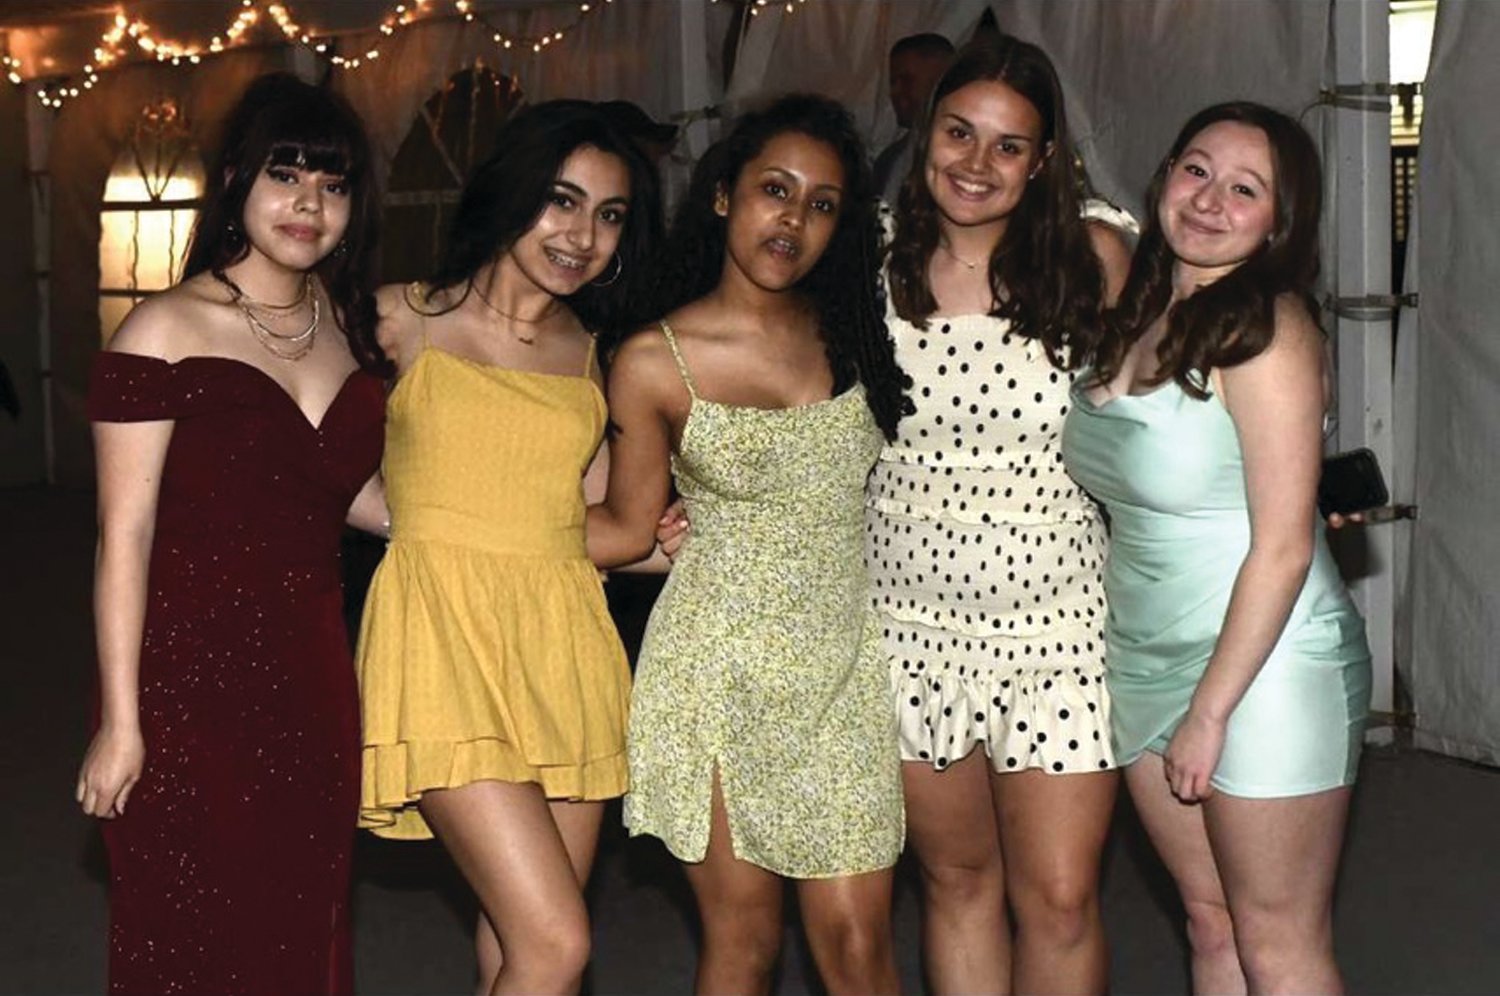 FUTURE QUEEN: The Semi Queen Court posing for a photo together. From left to right, Ash Torres, Alessandra Pesare, Jiana Mitsoulis, Hannah Lavergne and Aubree Allen.